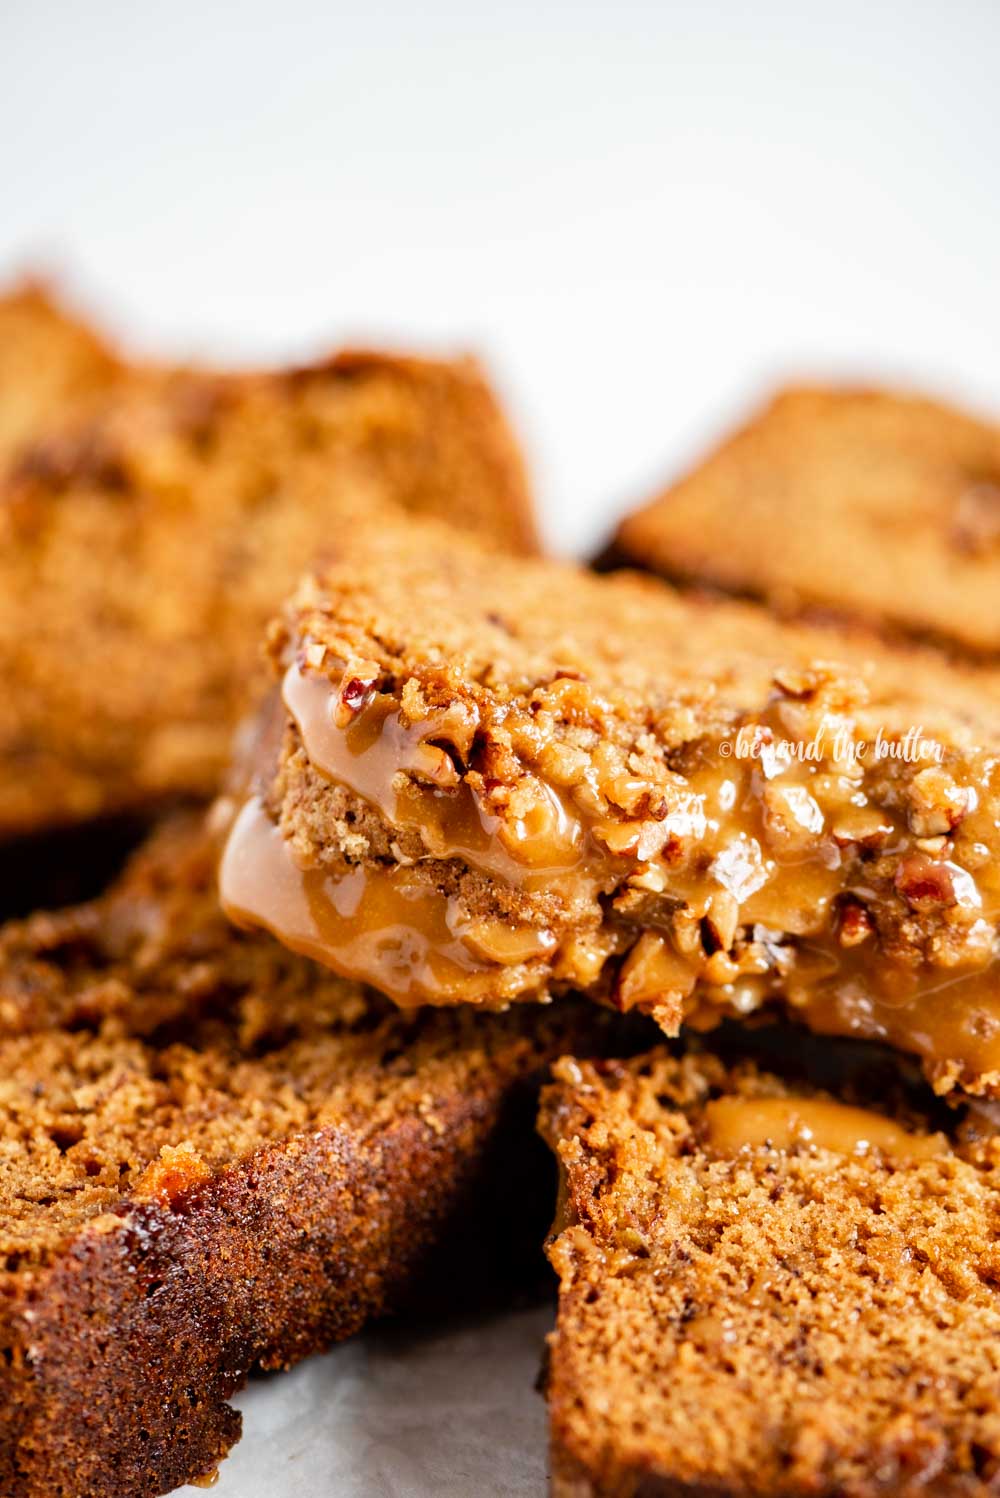 Closeup overhead image of slices of salted caramel banana nut bread on their side | All Images © Beyond the Butter™